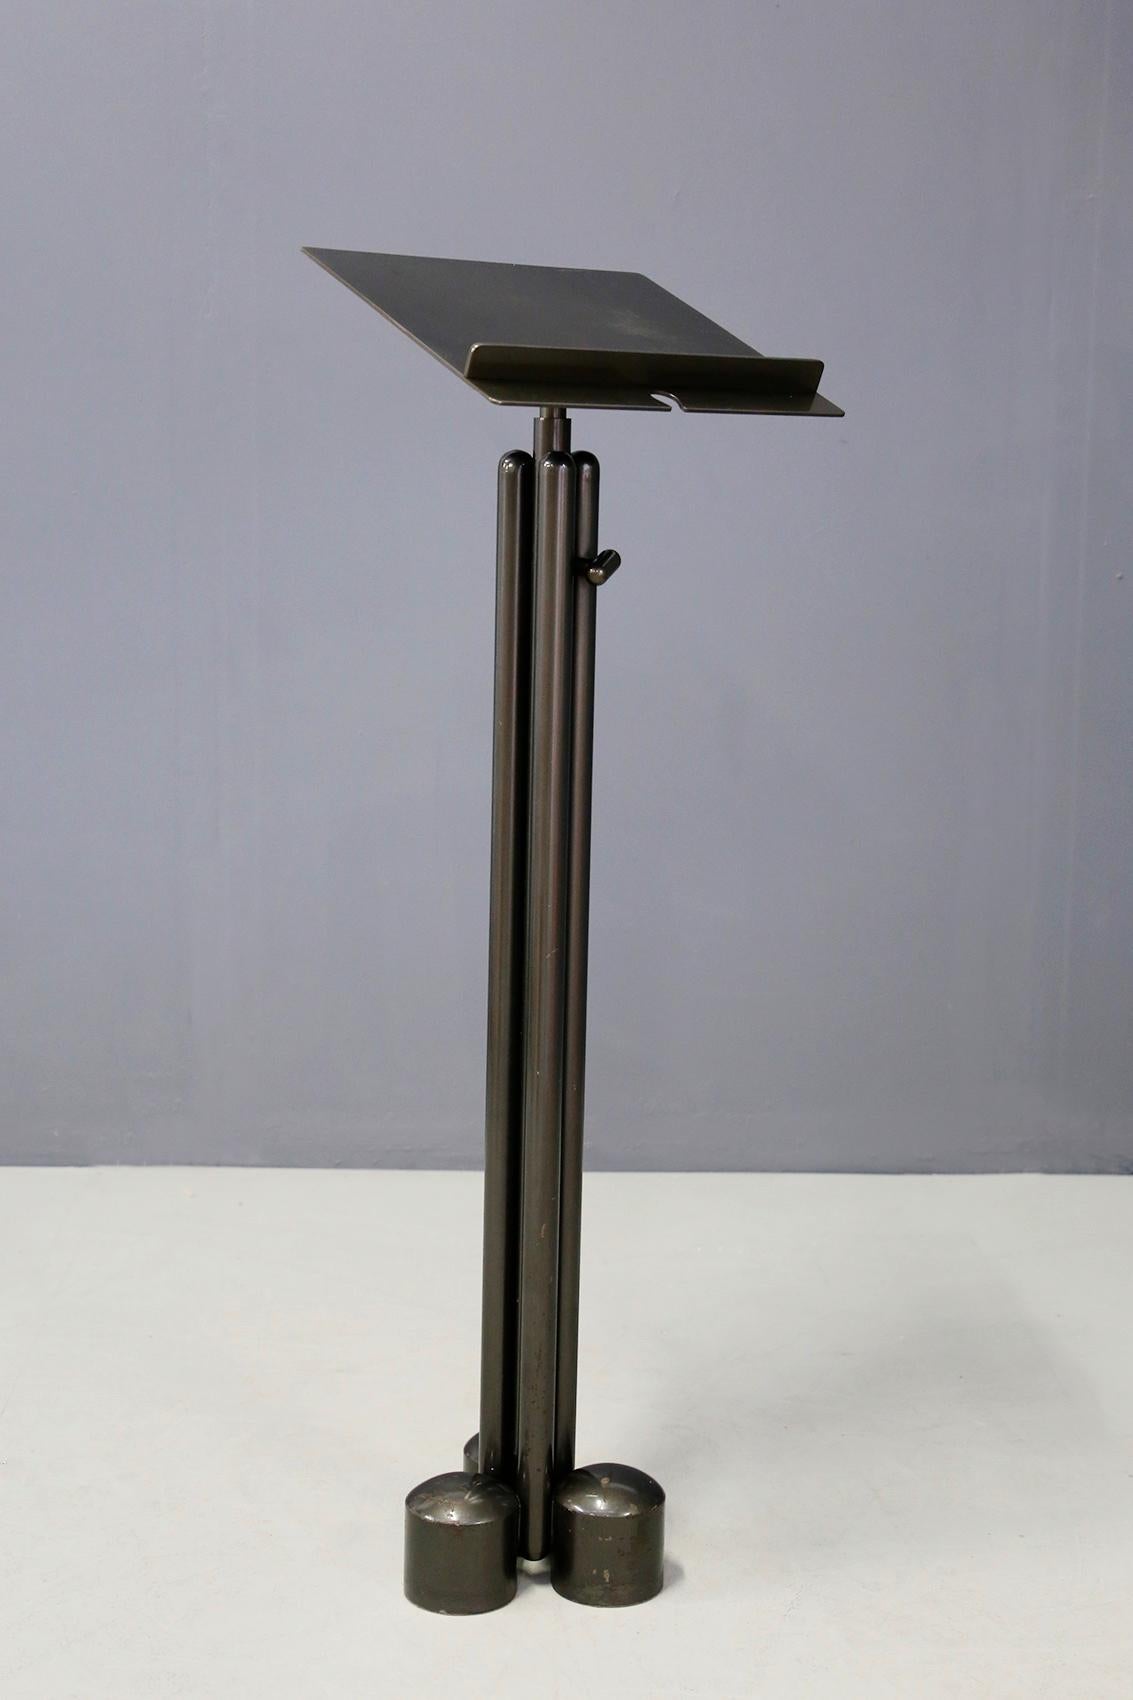 Rare book stand by Luigi Caccia Dominioni for the Azucena manufacture in 1966. The lectern is made entirely of dark grey painted metal. The lectern is made of three painted metal tubes. The lectern is adjustable in height. The lectern is in good